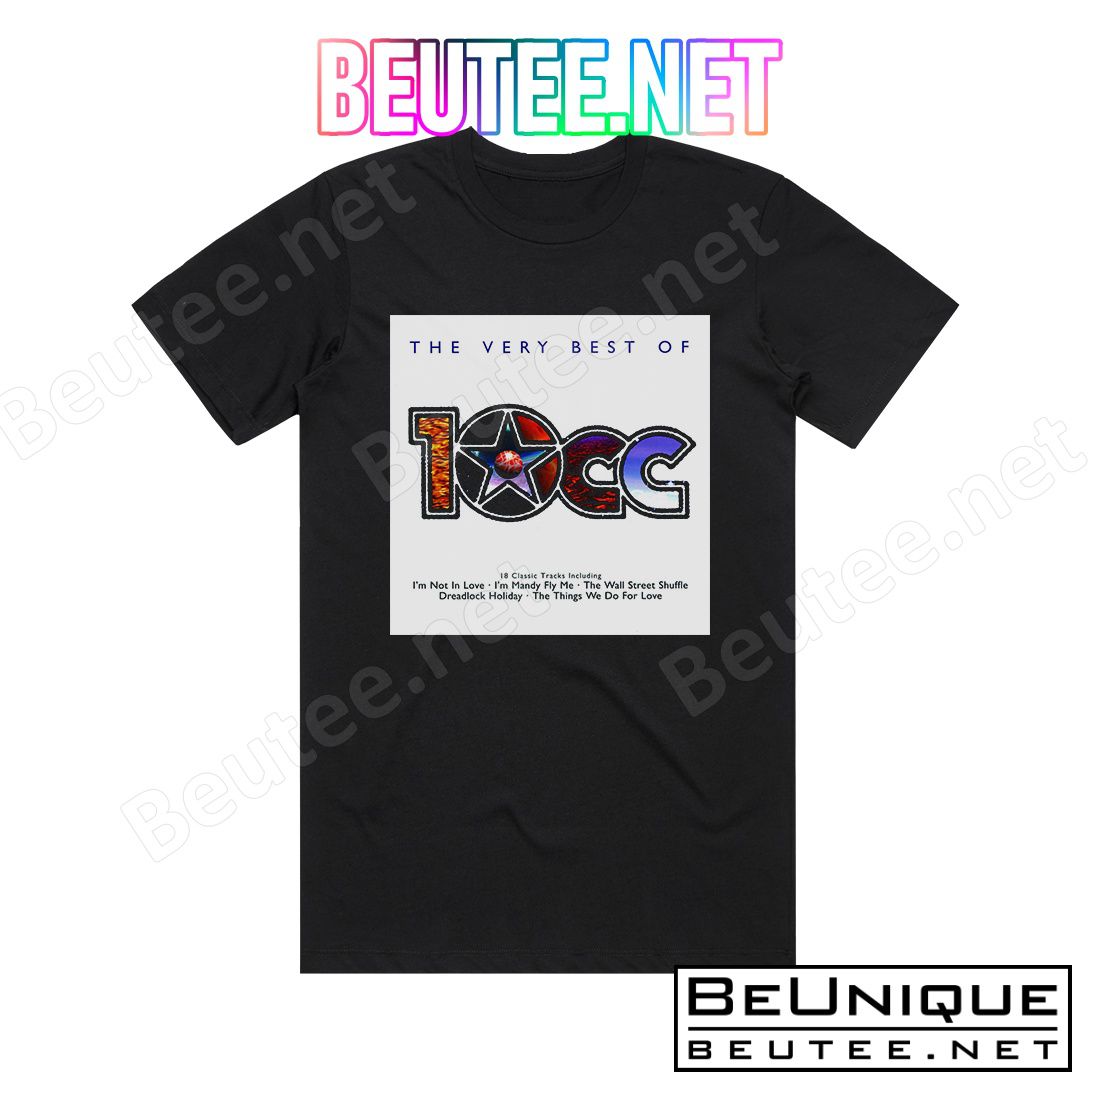 10cc The Very Best Of 10Cc 1 Album Cover T-Shirt